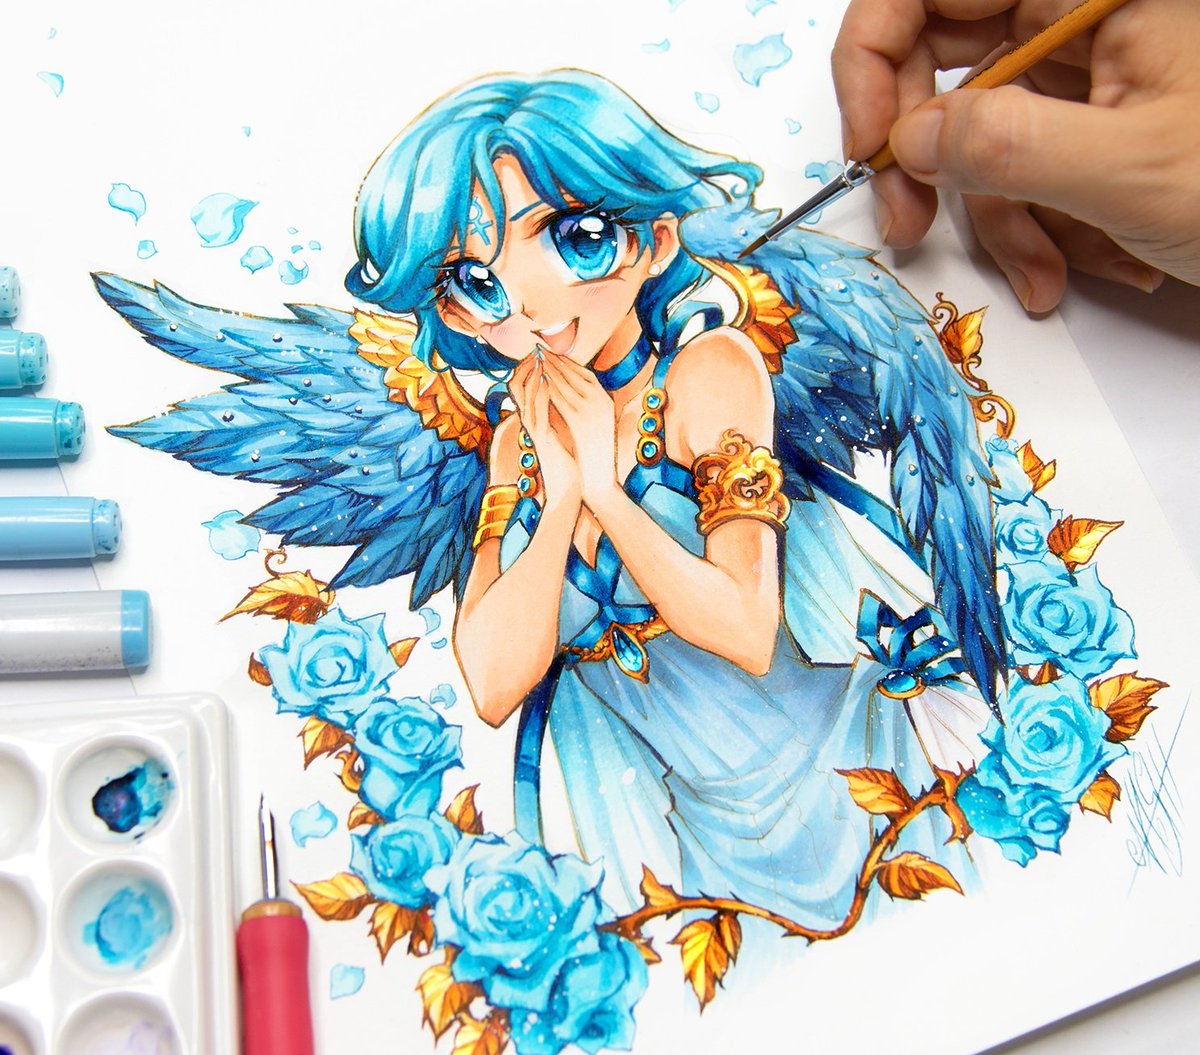 🩵 Moon Angel Mercury 🩵
Mostly done with Copic Marker and with a bit of vivid watercolors Mercury is starting the new Moon Angel Series.
Do you like blue? 🩵
#sailormercury #sailormooncrystal #sailormoon #angel #wings #sailormoonfanart #watercolor #copic #manga #copicmarkers